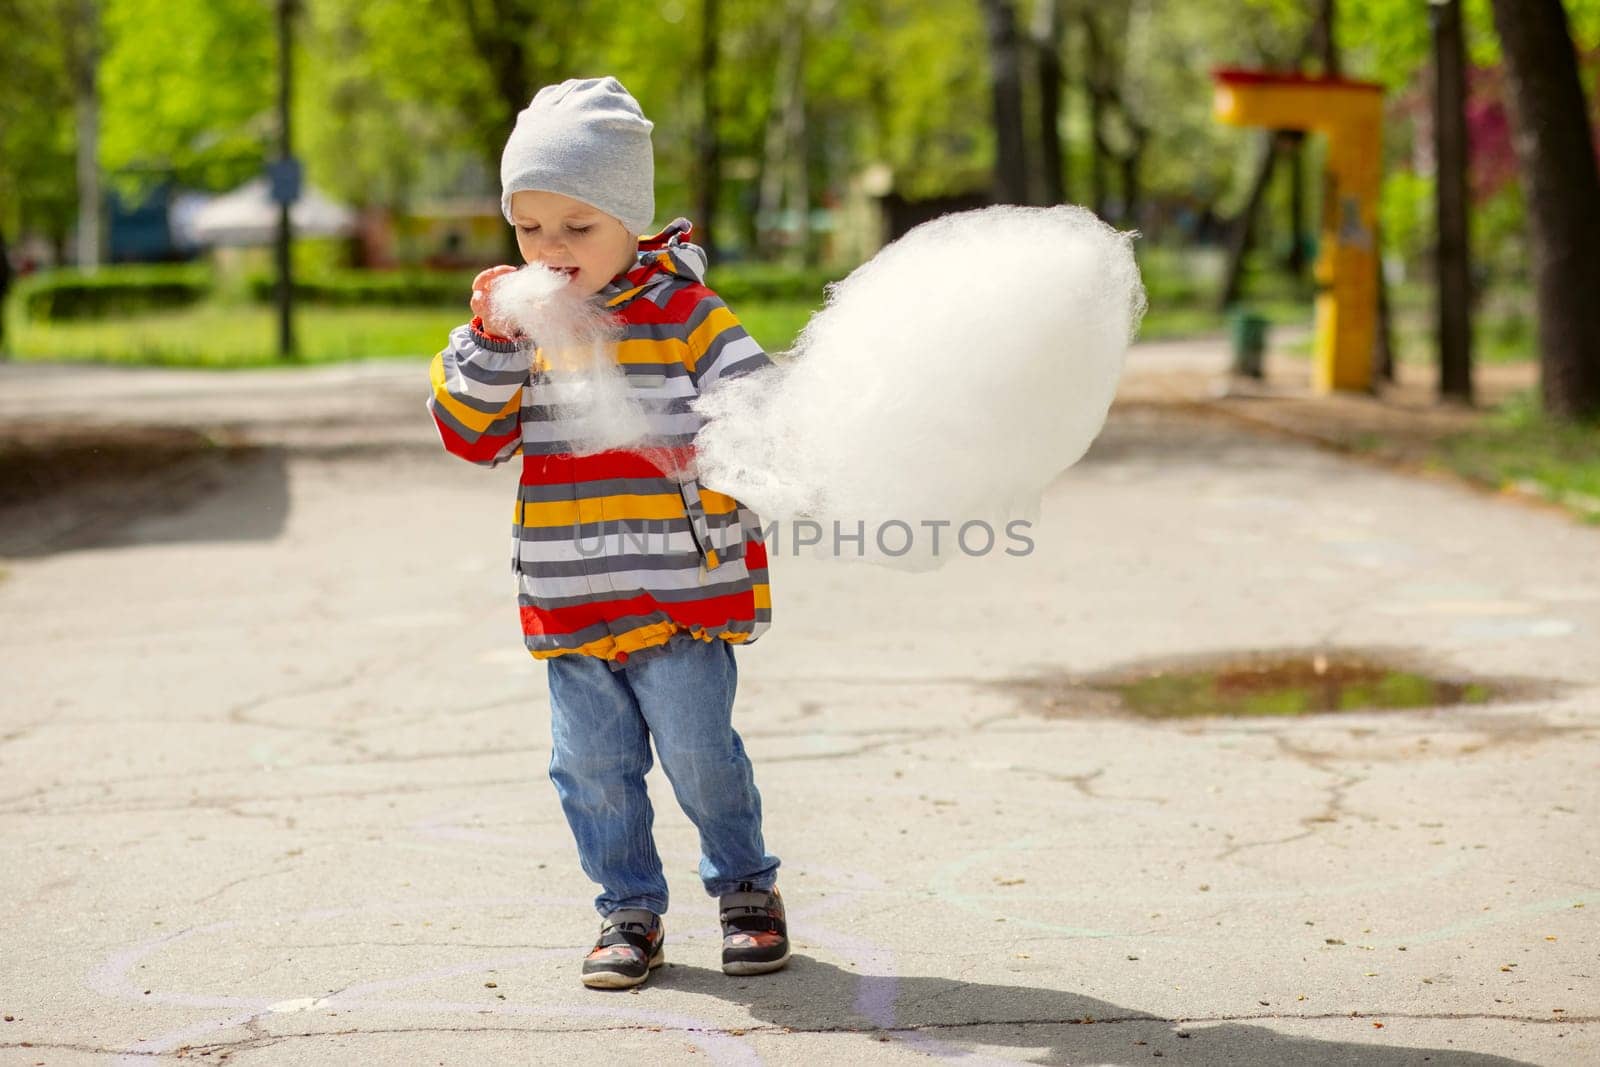 Child boy in an amusement park eats cotton candy. Preschool child eats candy floss with pleasure during the holidays